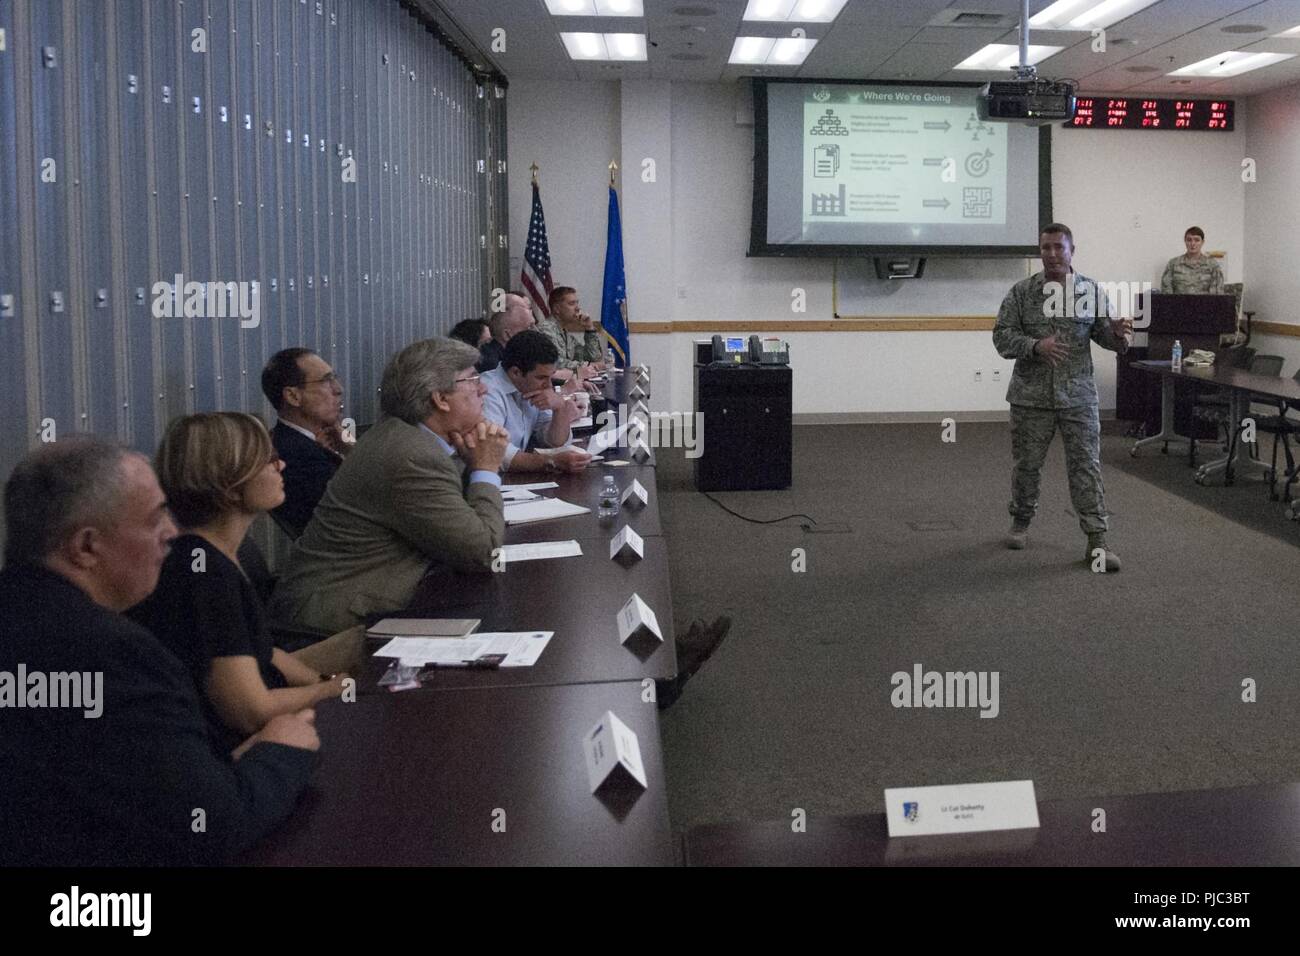 Lt. Col. Michael Doherty, 48th Intelligence Squadron commander, talks about cultivating innovation culture during a Defense Innovation Board visit at Beale Air Force Base, California July 12, 2018. The board visits different installations is to see successes that they can try to replicate in the Department of Defense. Stock Photo